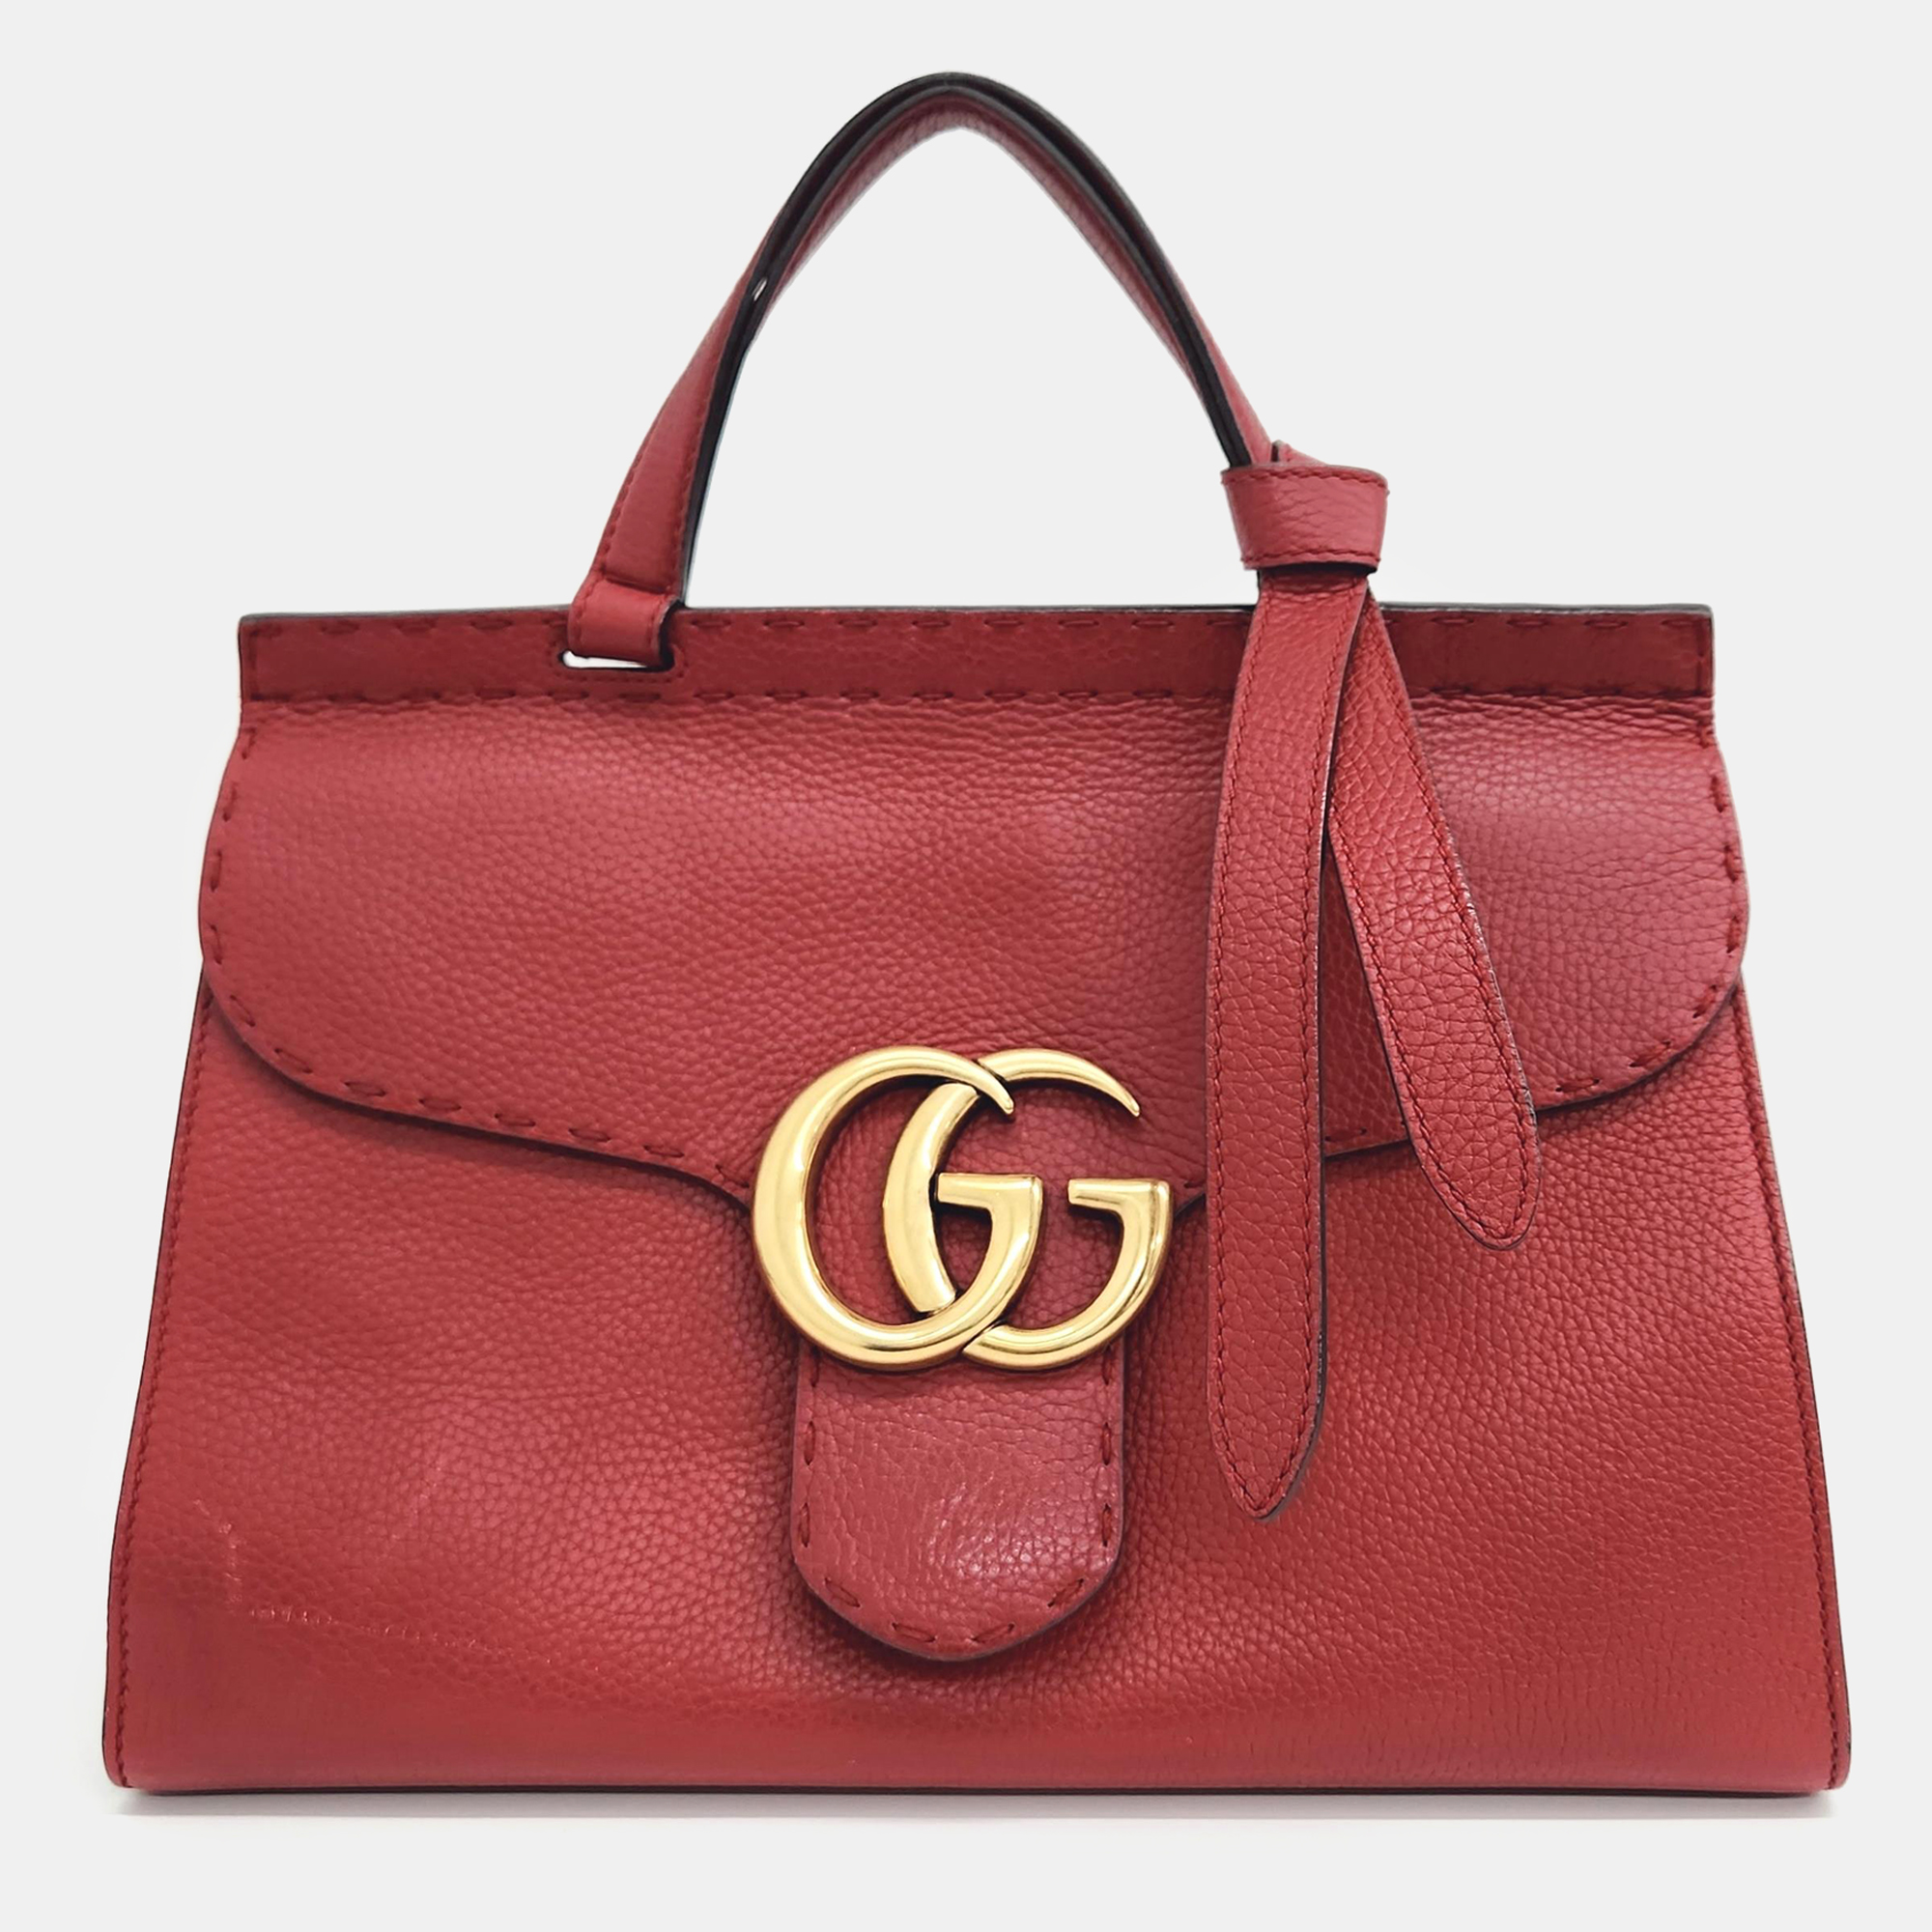 Gucci gg marmont tote and shoulder bag (421890)